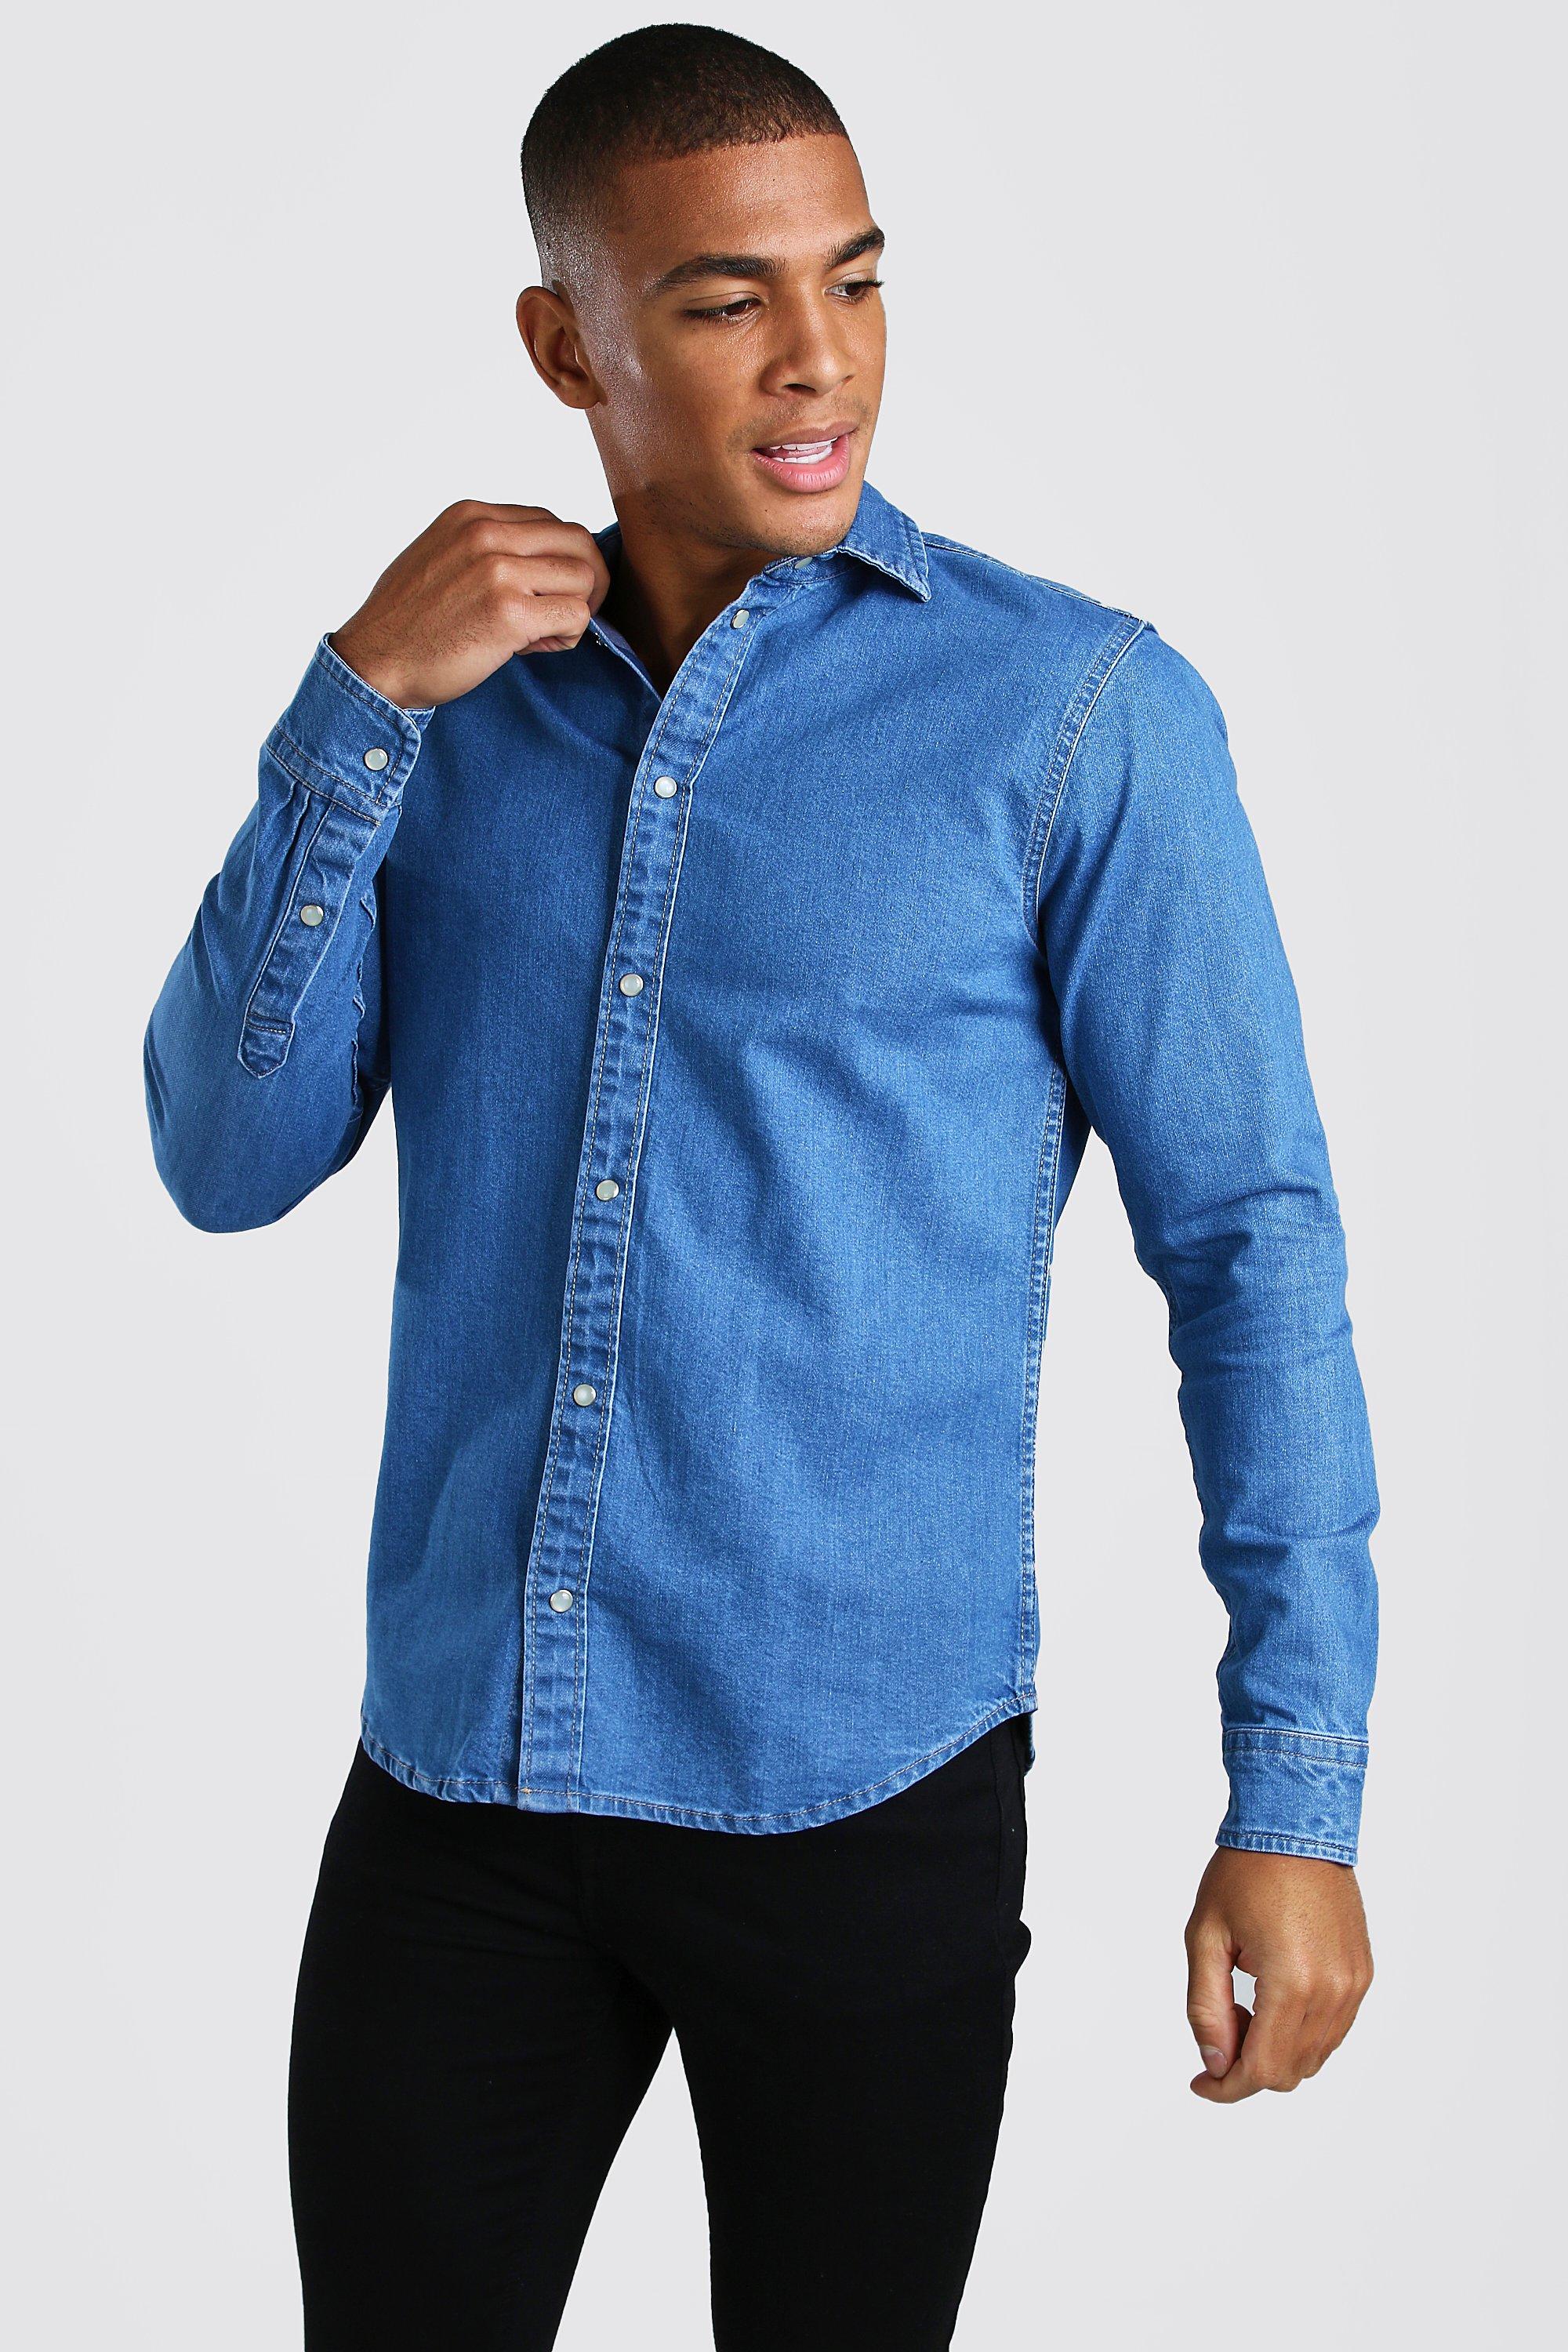 HTOOHTOOH Mens Denim Slim Solid Color Long Sleeve Casual Button Front Shirts 